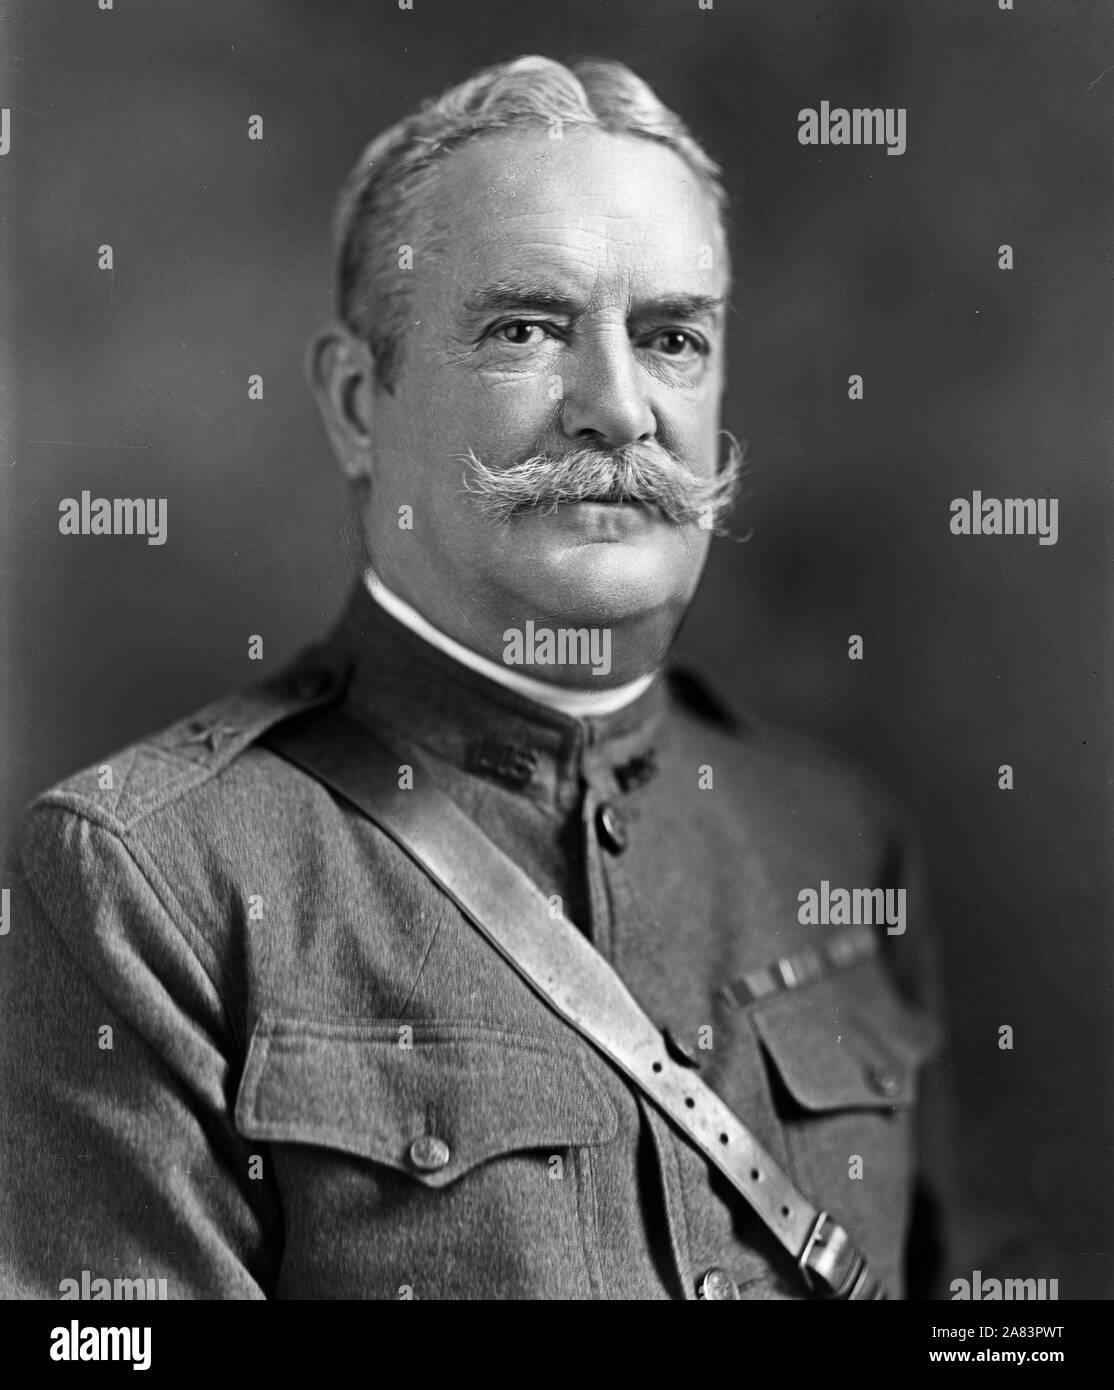 General George P. Scriven, first chariman of NACA, the National Advisory Committee on Aeronautics, NASA predecessor ca. early 1900s Stock Photo